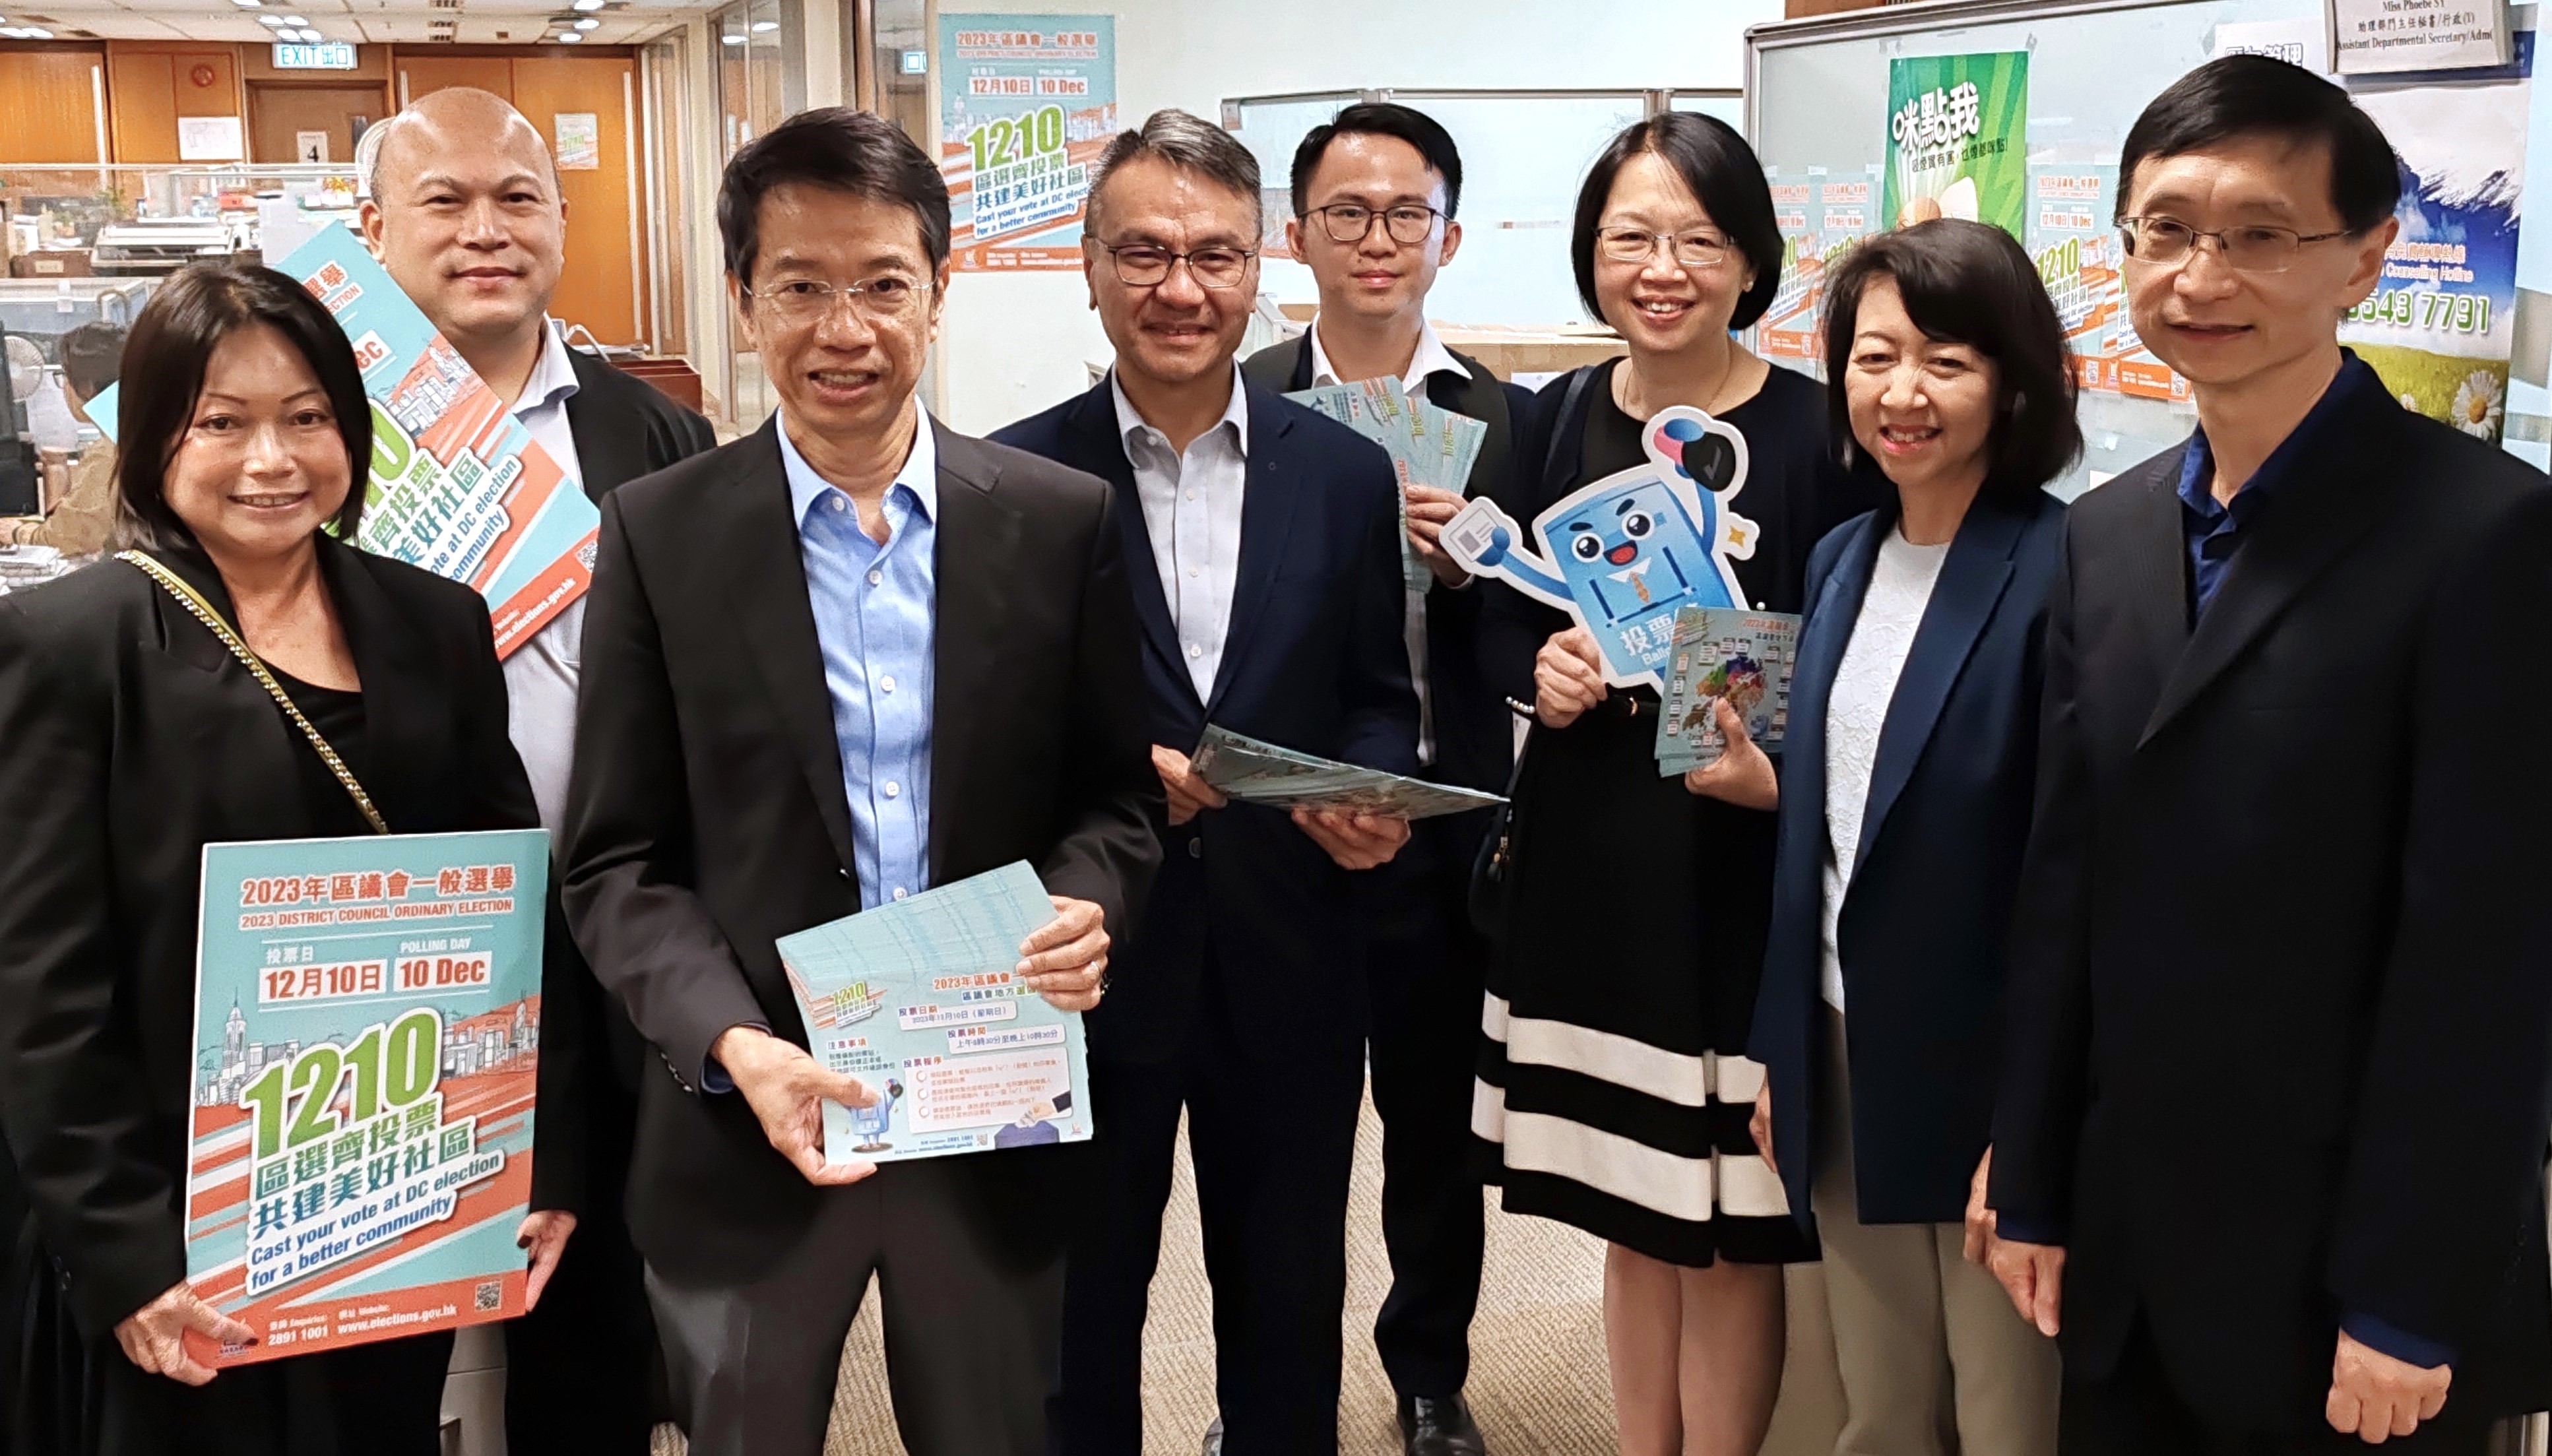 The Permanent Secretary for the Civil Service, Mr Clement LEUNG, JP (second from the left, front row) together with representatives of civil service groups, promoted the DC election to staff members of the Land Registry